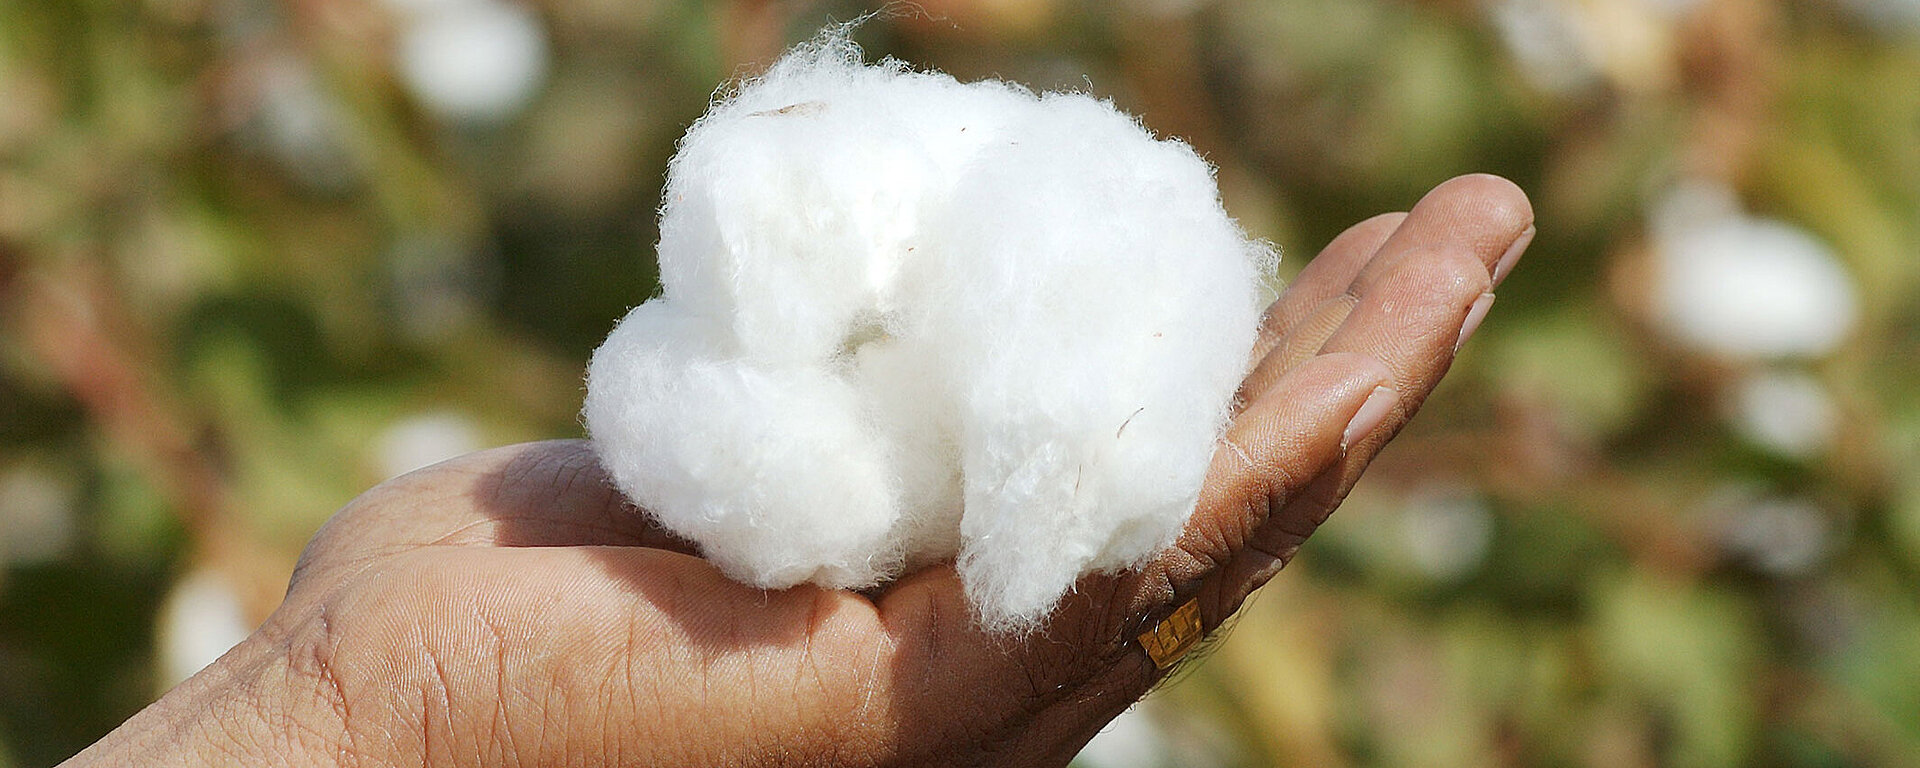 Organic Cotton Vs. Conventional Cotton: What's The Difference?